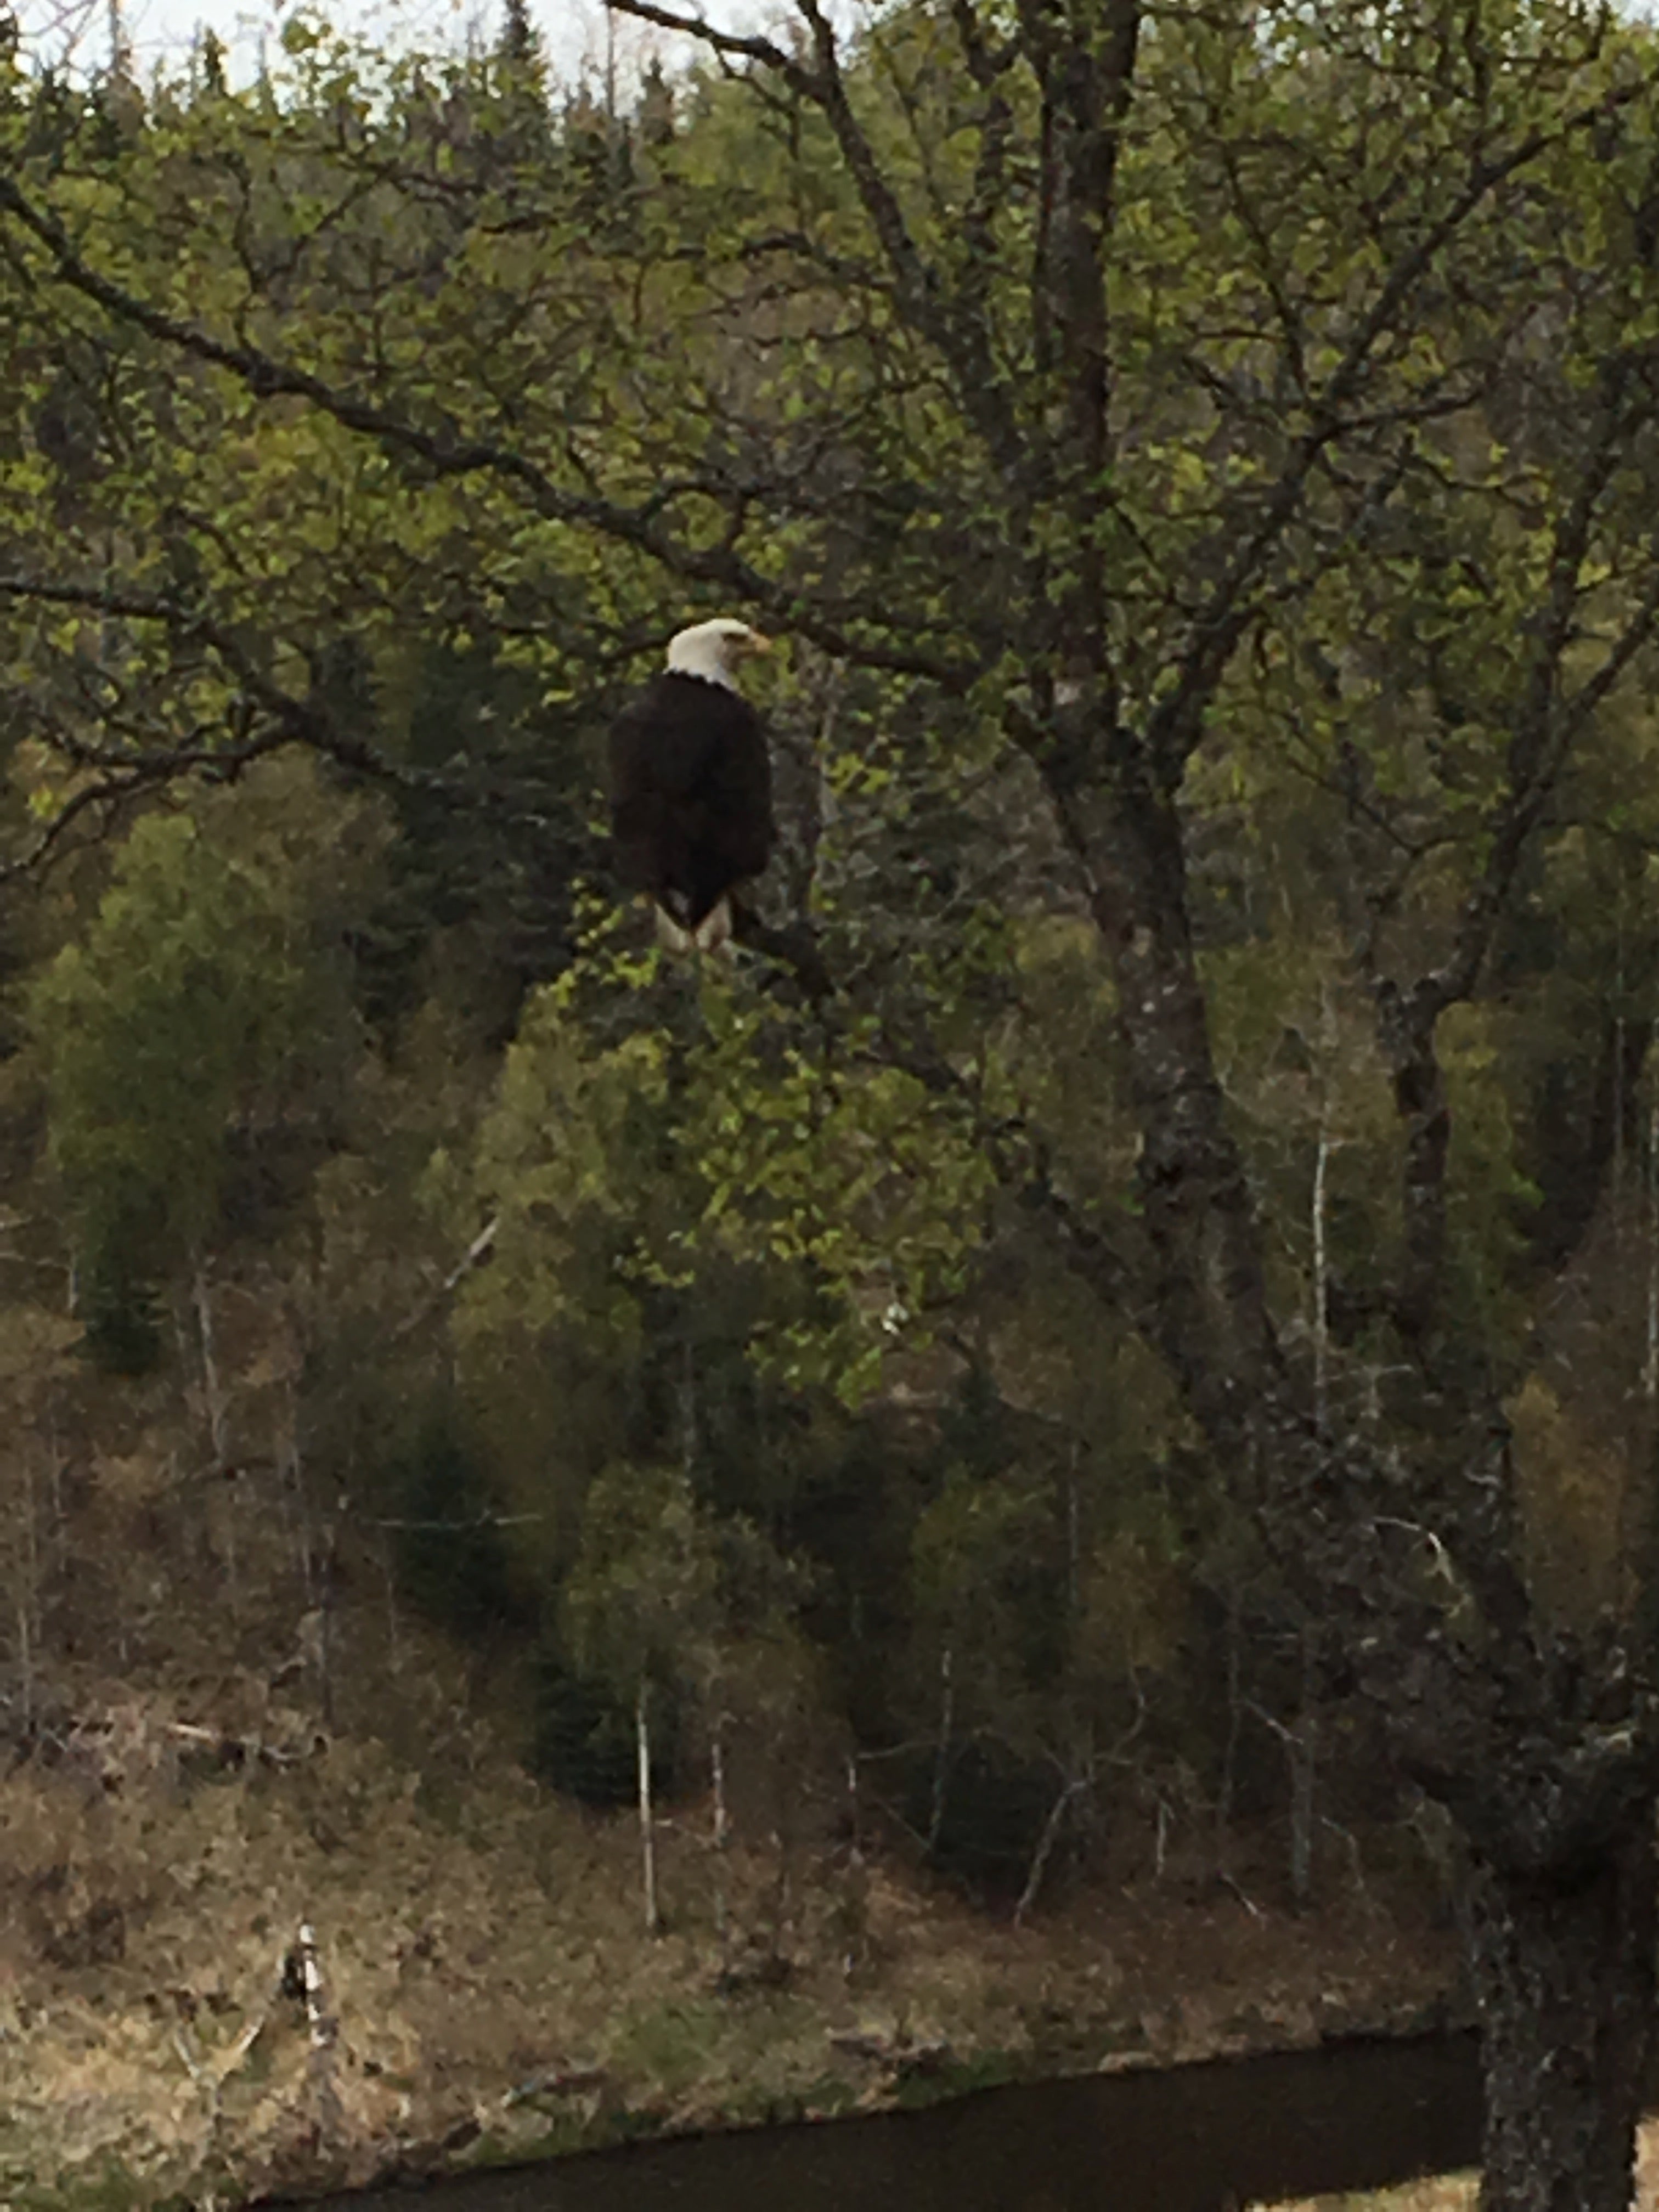 One of the many many nearby Bald Eagles.